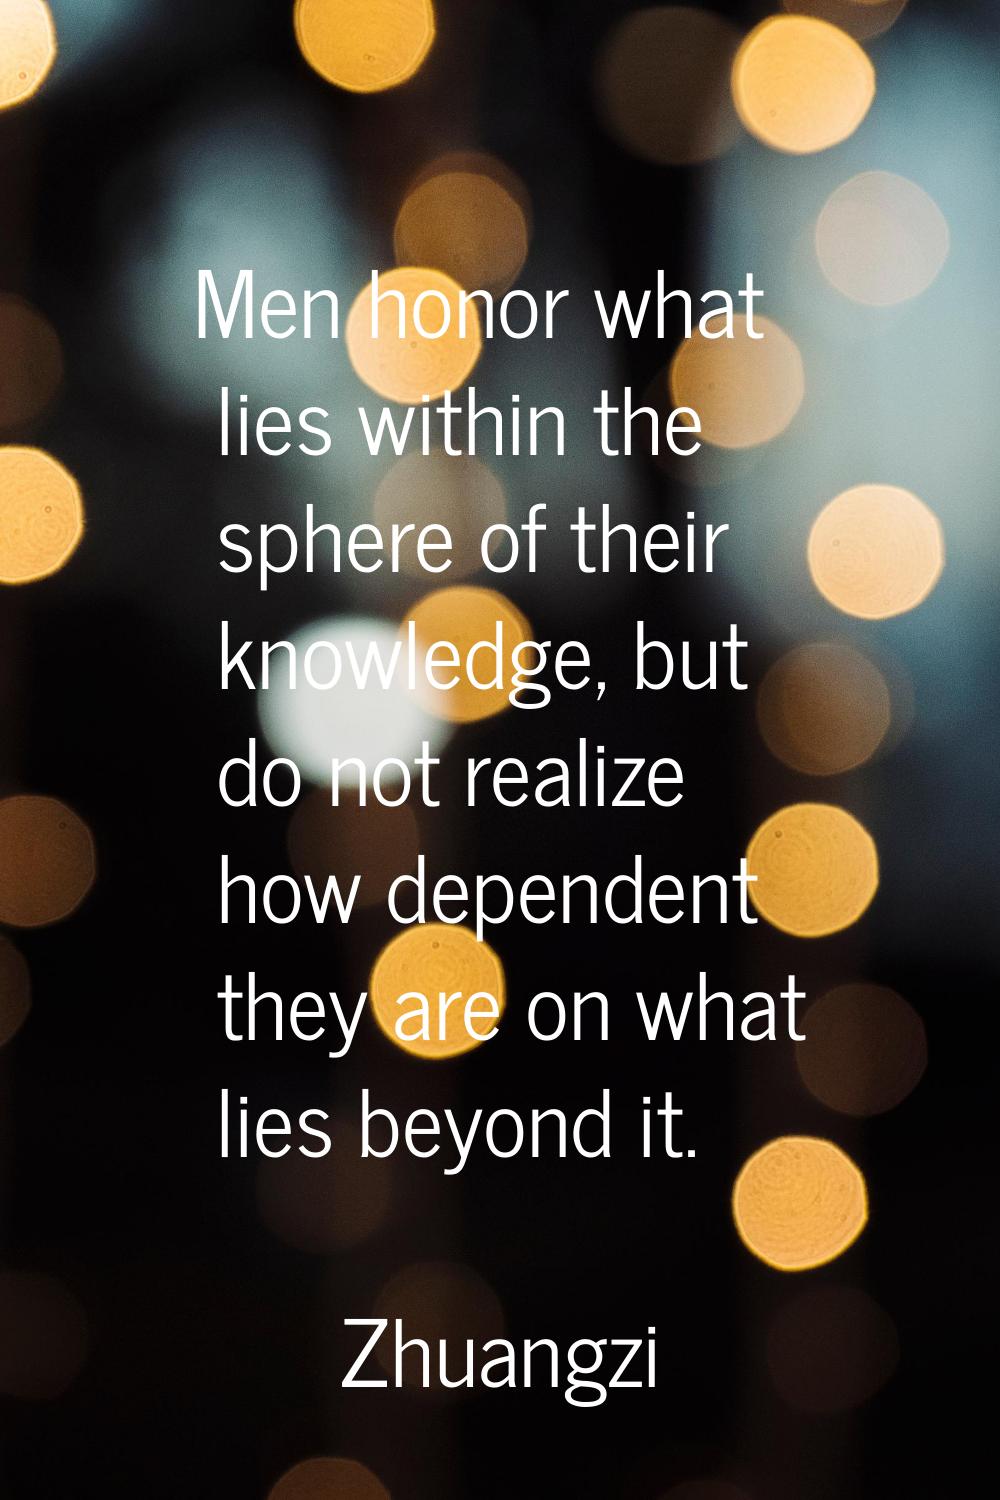 Men honor what lies within the sphere of their knowledge, but do not realize how dependent they are